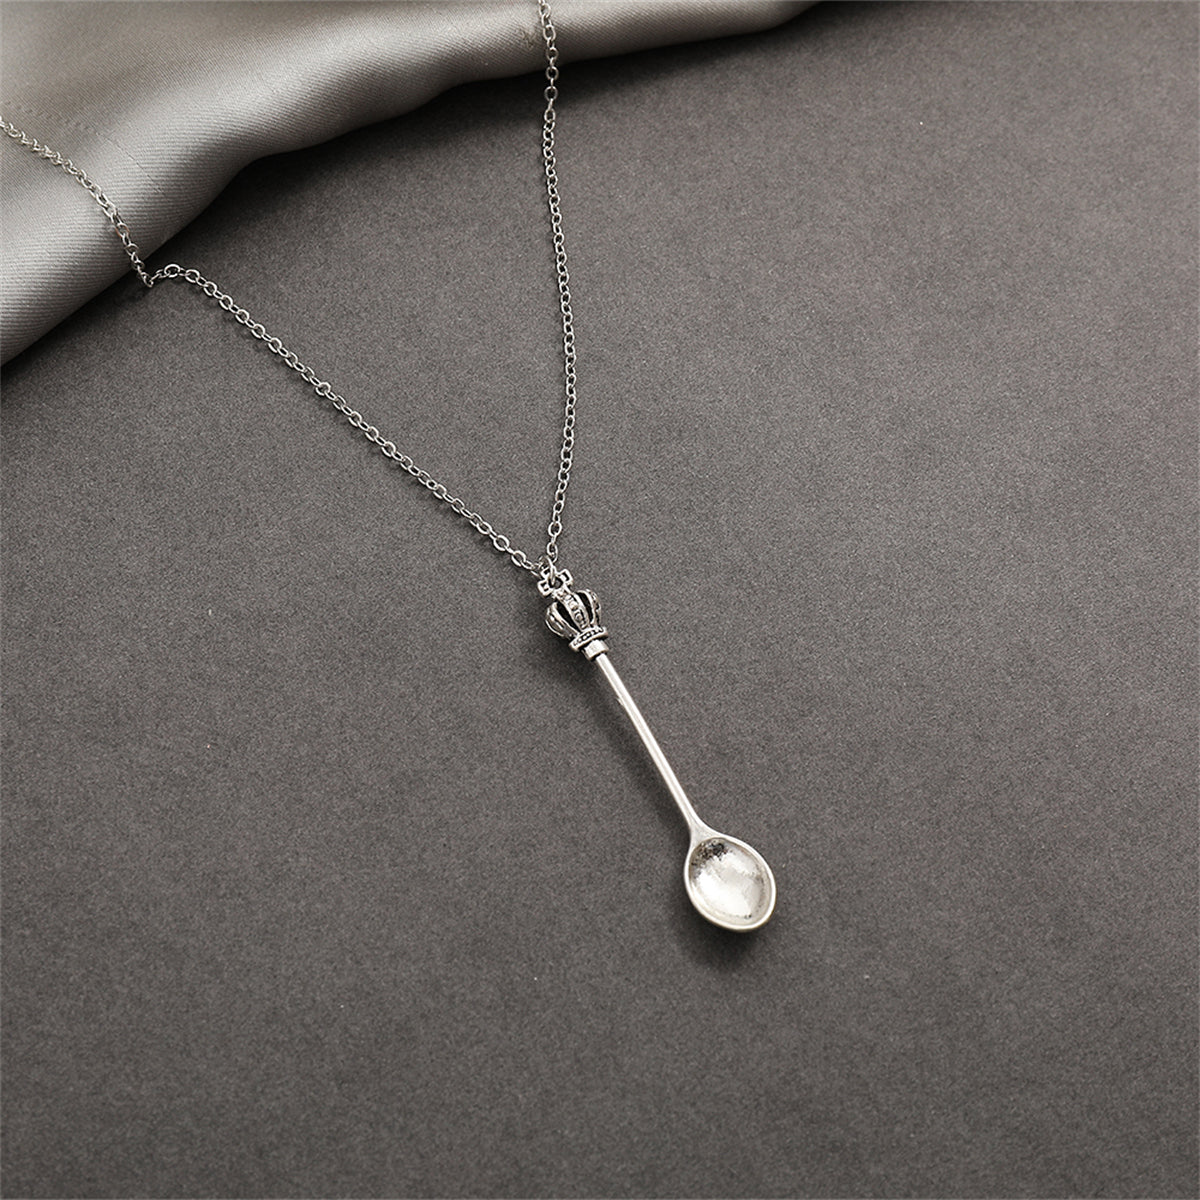 Silver-Plated Spoon Pendant Necklace